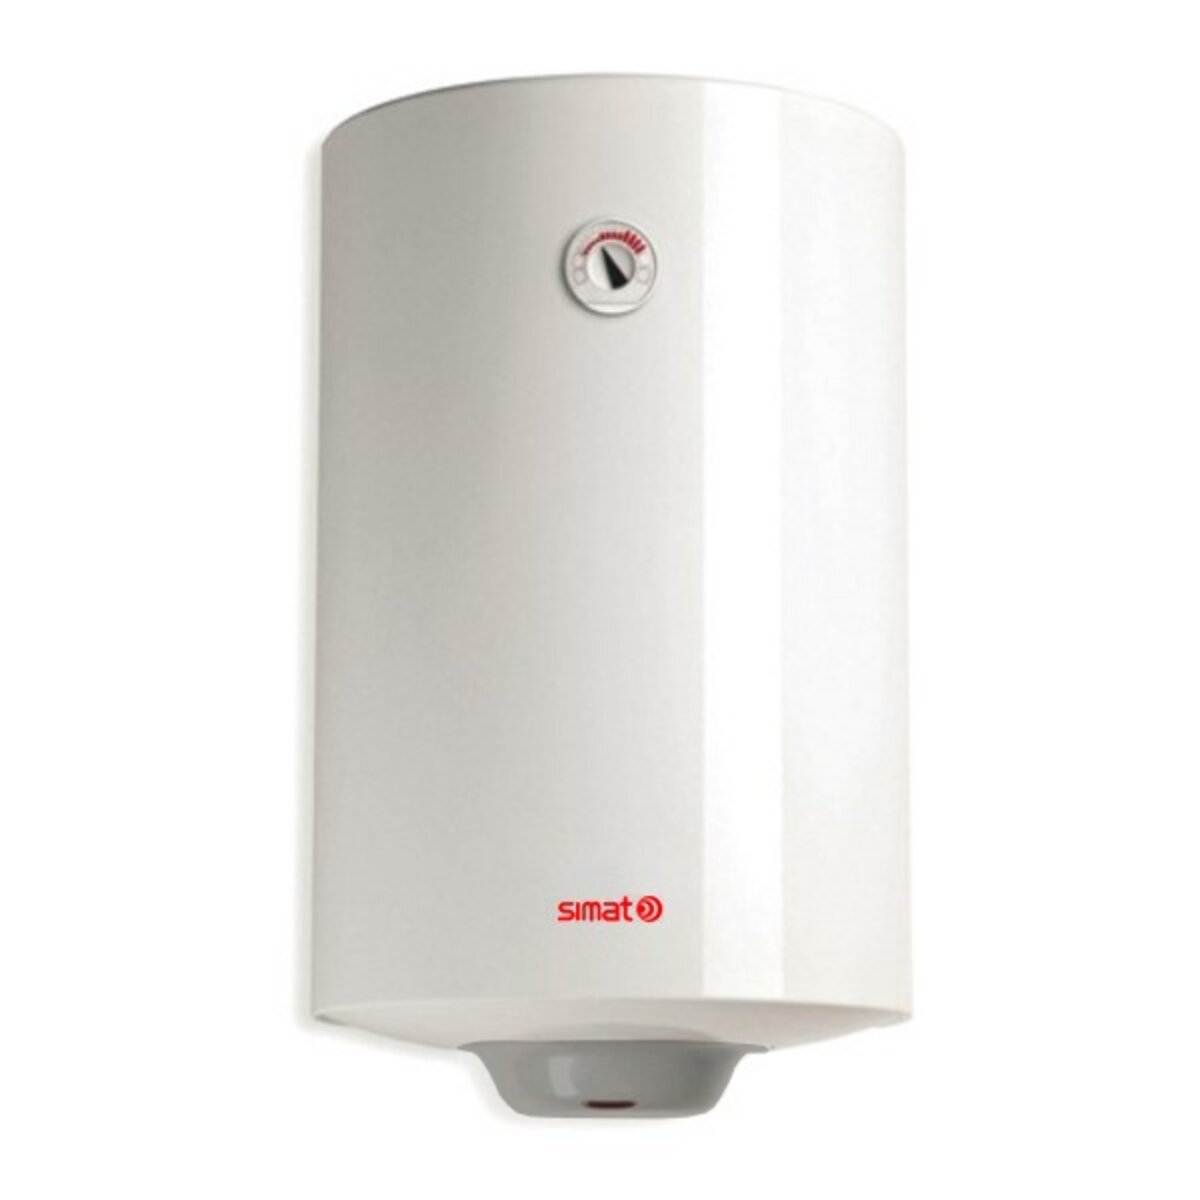 Simat electric water heater by Ariston 80 liters vertical 2 year warranty